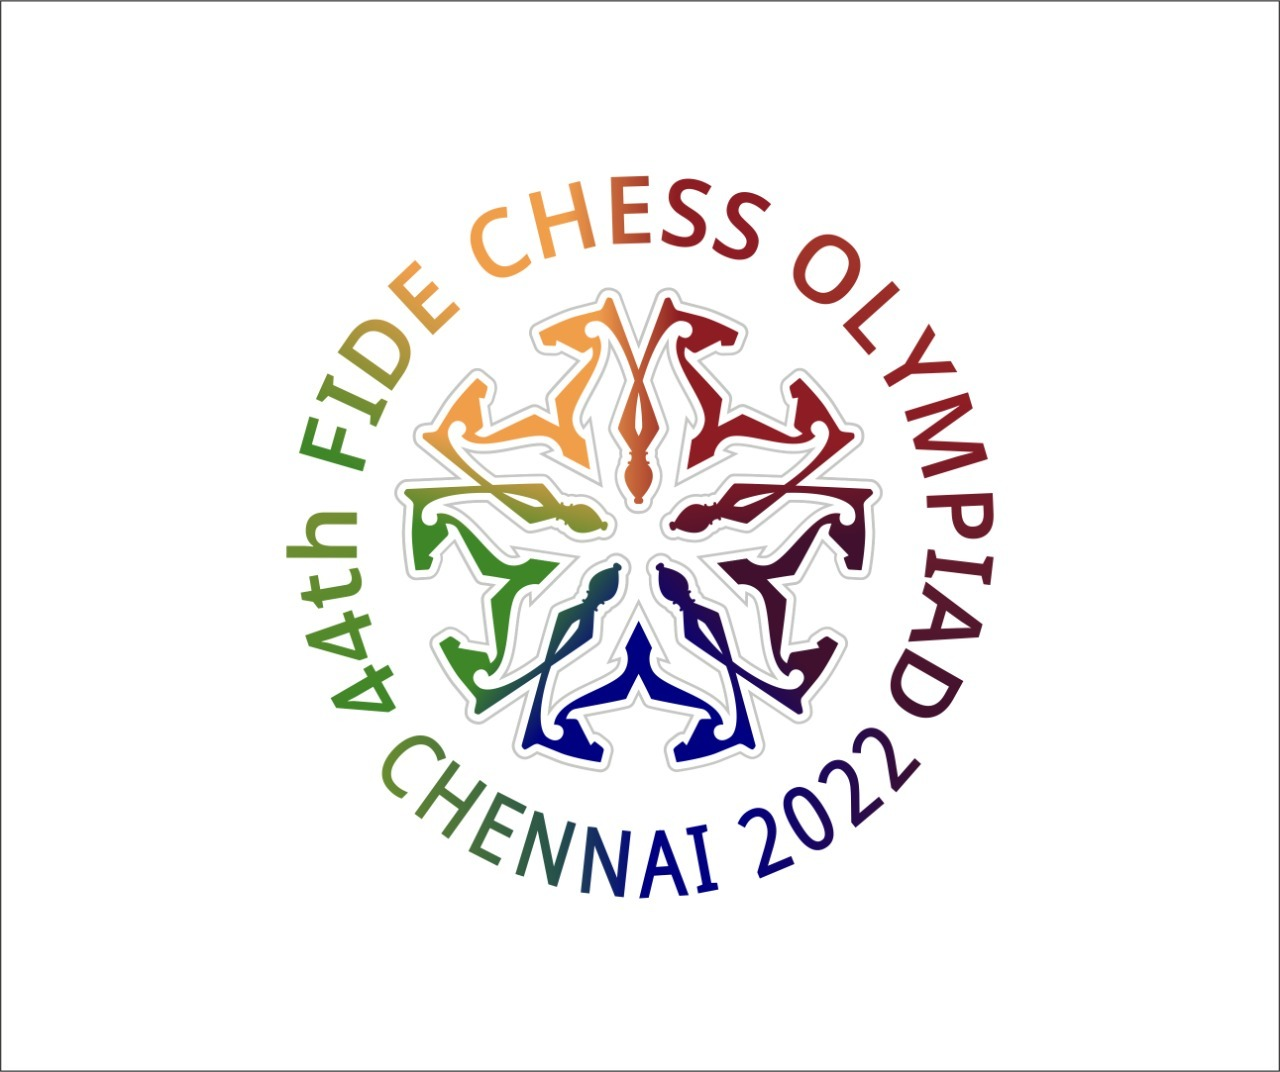 Teams that will take part in the 44th Chess Olympiad are announced! The teams that will be in the 44th Chess Olympiad have been excitedly announced, from July 28 to August 10.